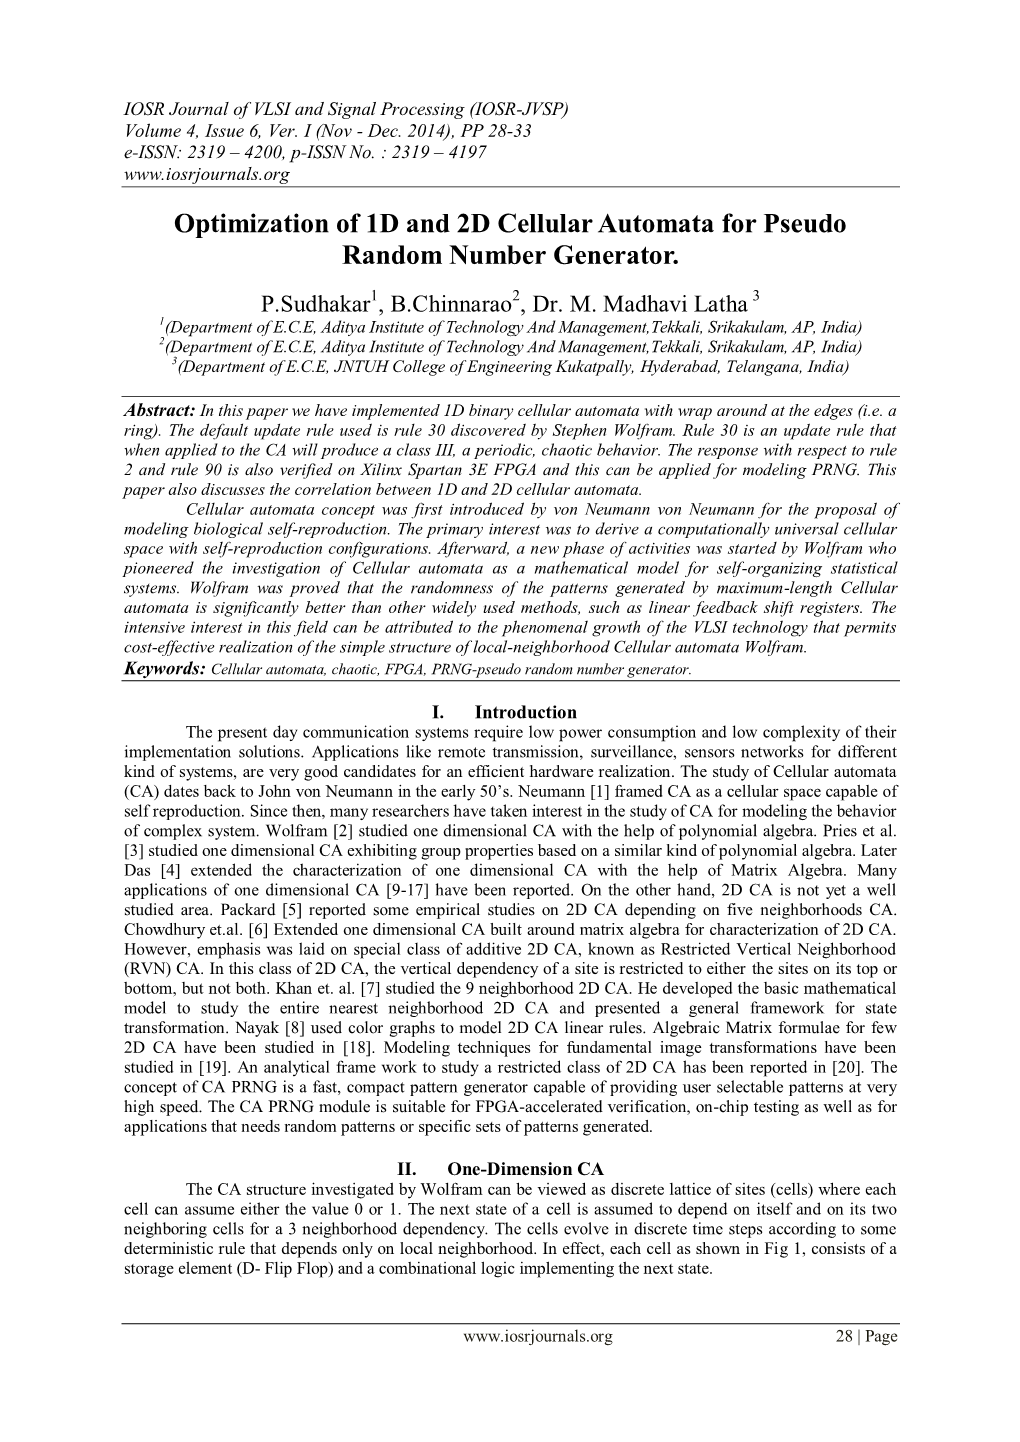 Optimization of 1D and 2D Cellular Automata for Pseudo Random Number Generator